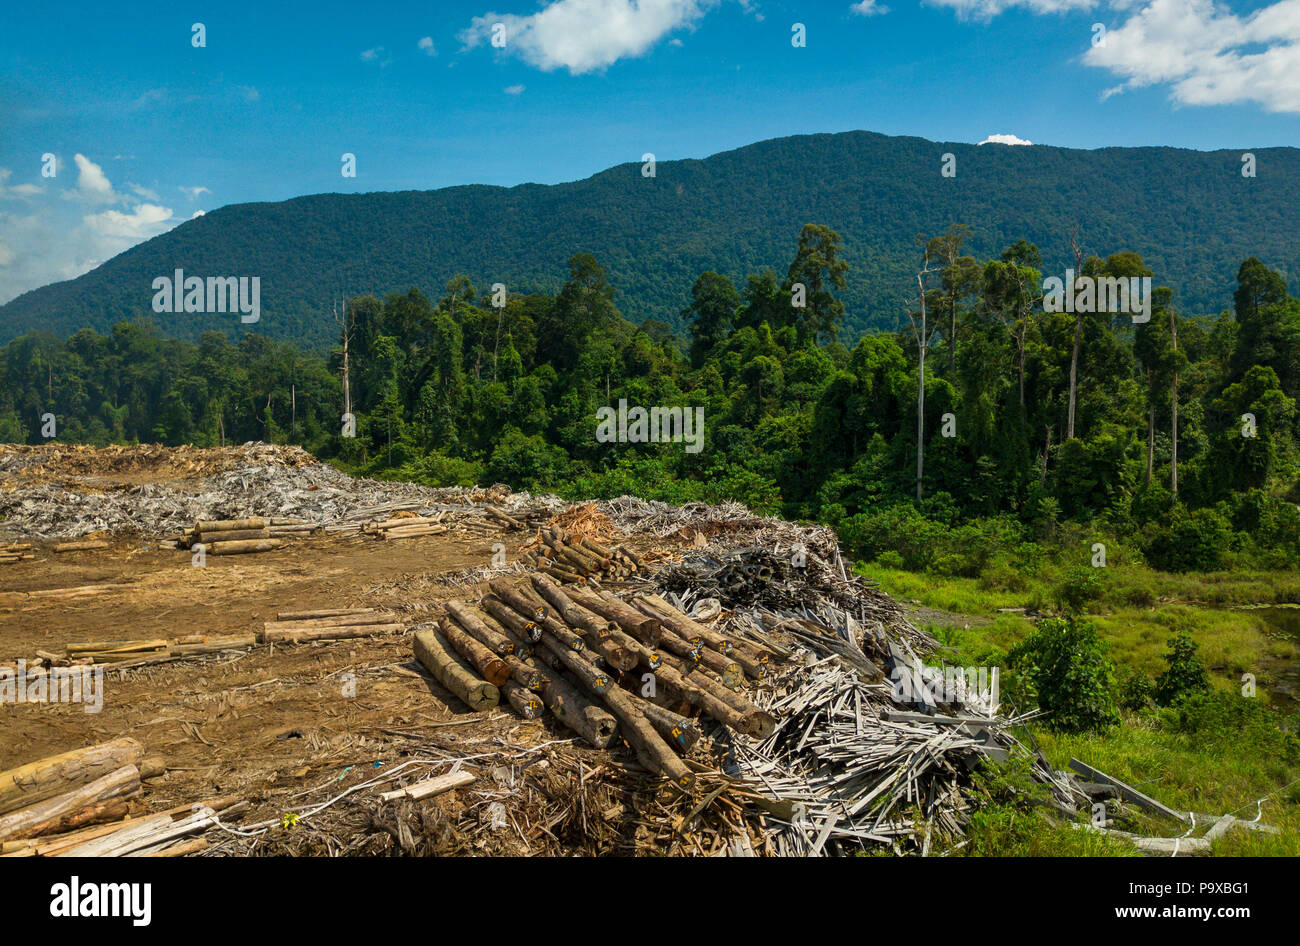 Logs and timber at a commercial timber yard near Tongod in Sabah, Malaysia, (Borneo), with rainforest and mountains in the background. Stock Photo